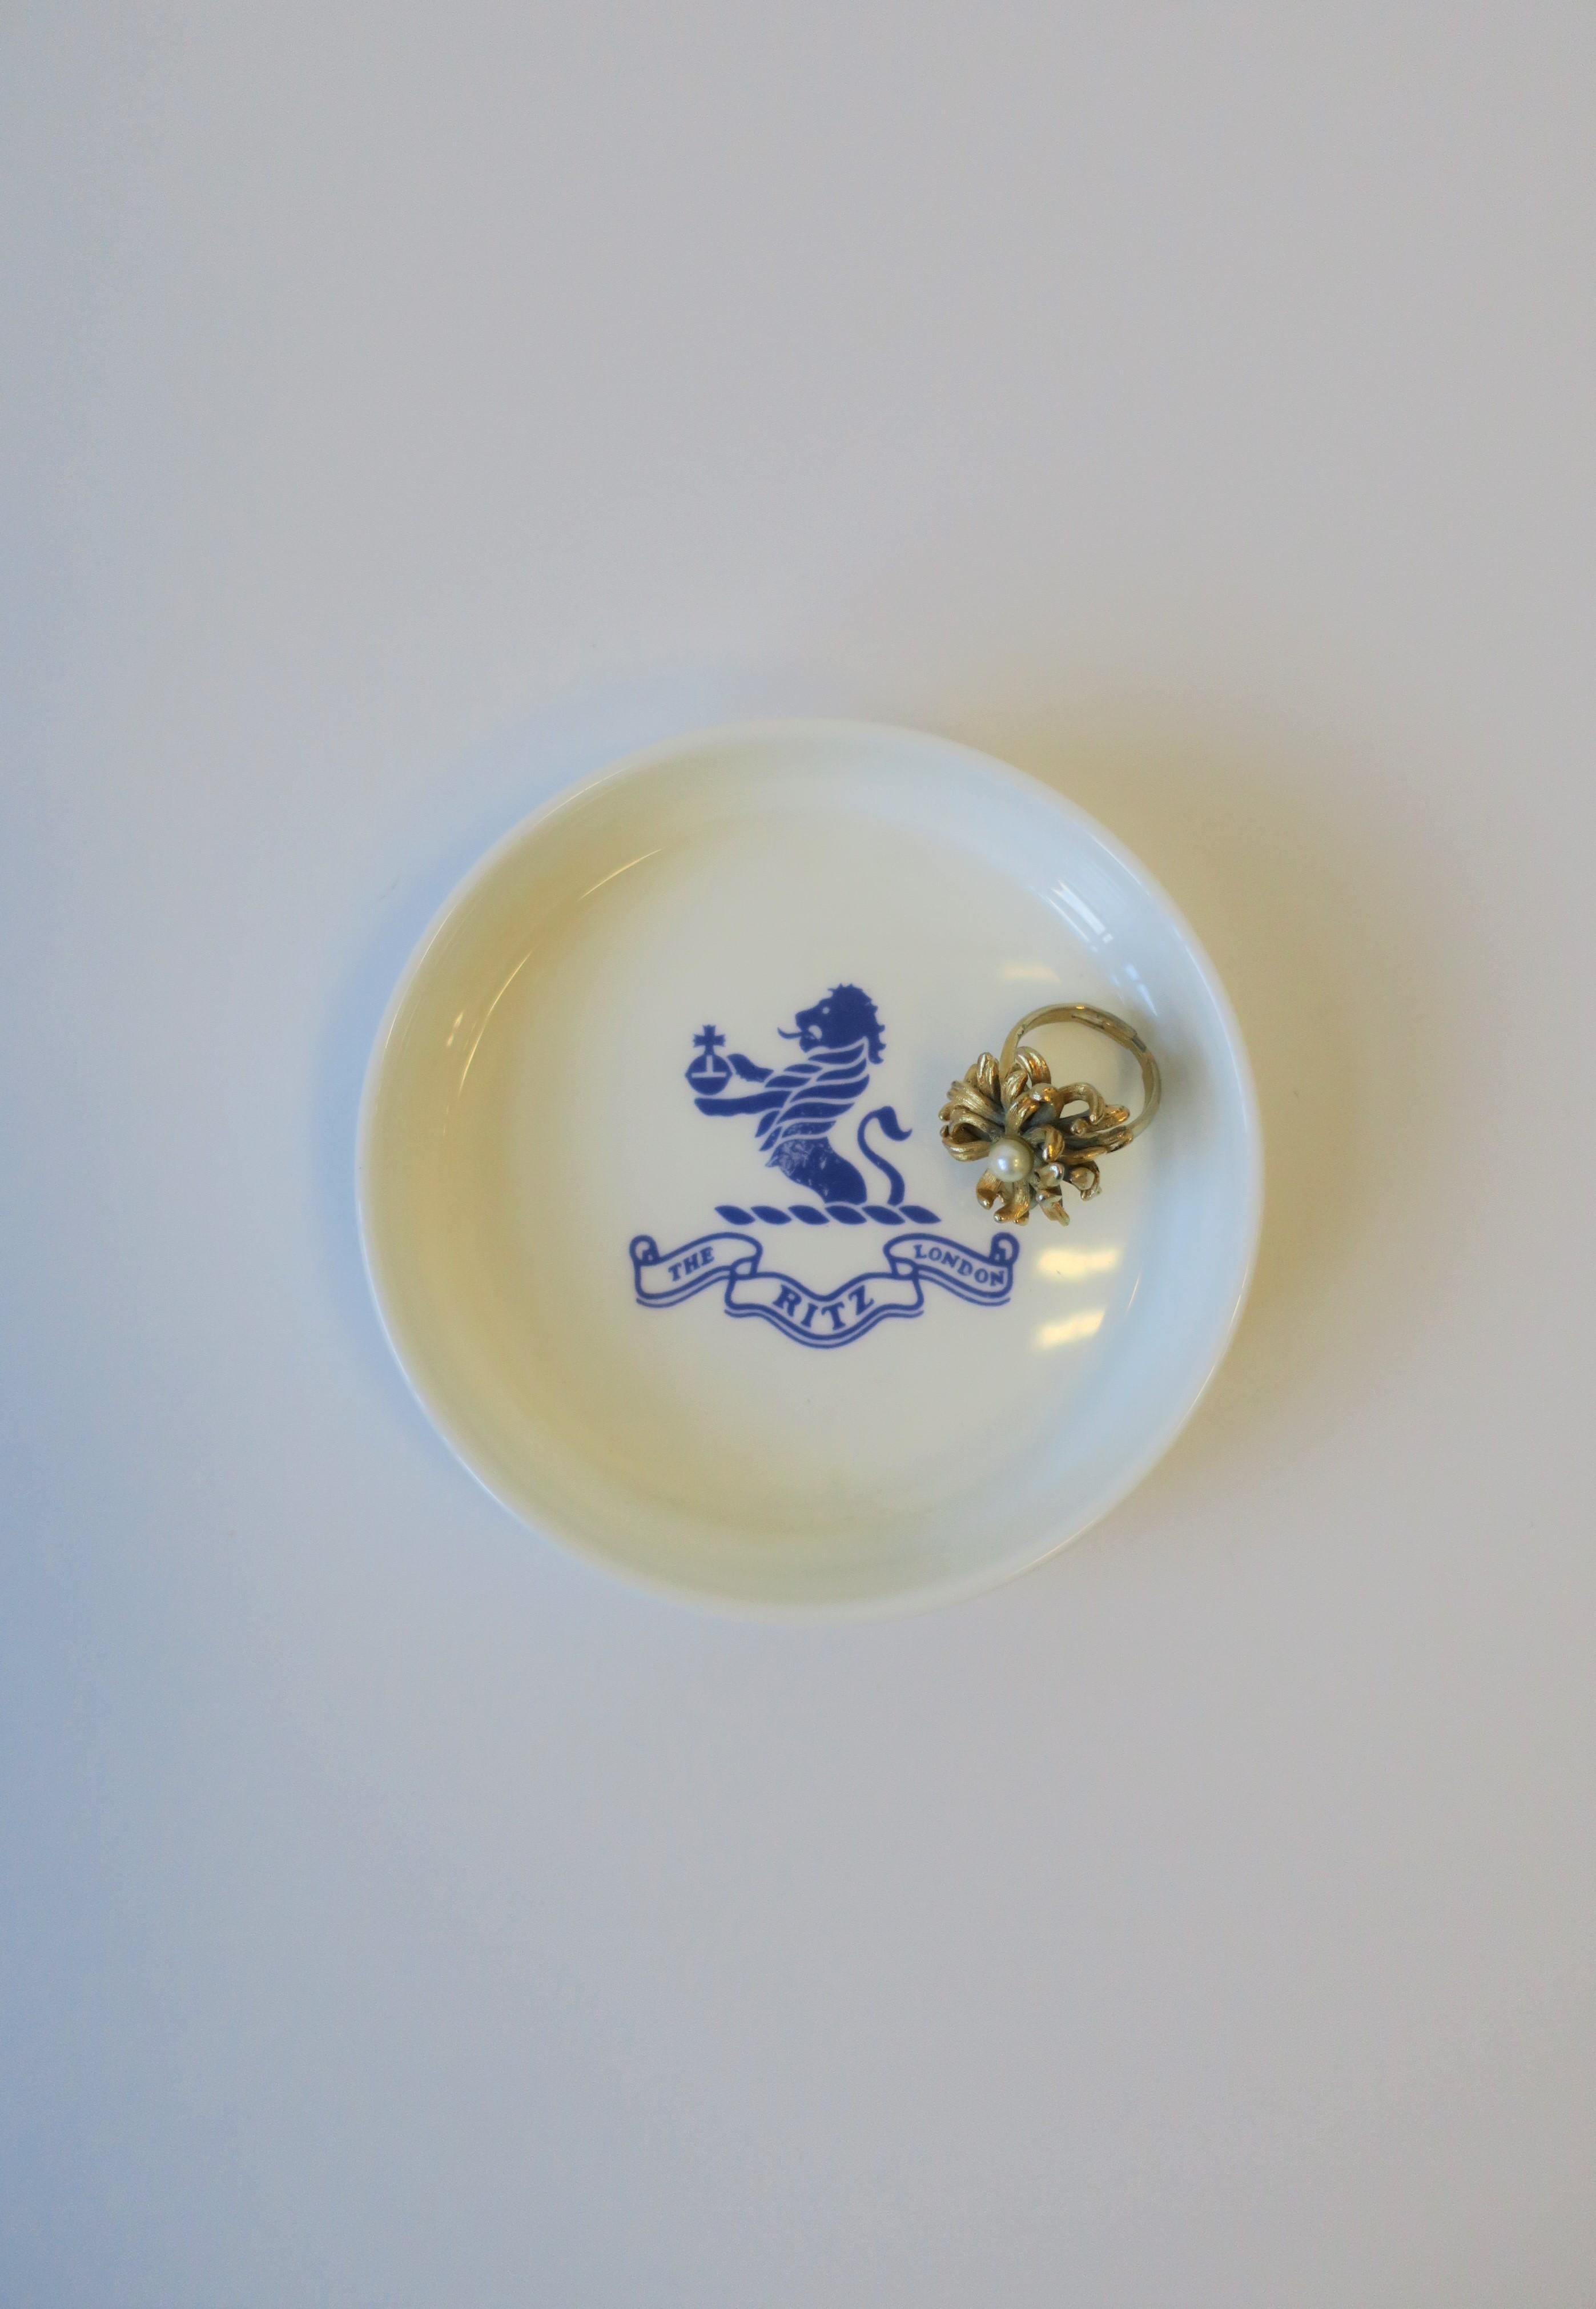 The Ritz Hotel London Blue and White Porcelain Jewelry Dish by Royal Doulton 4